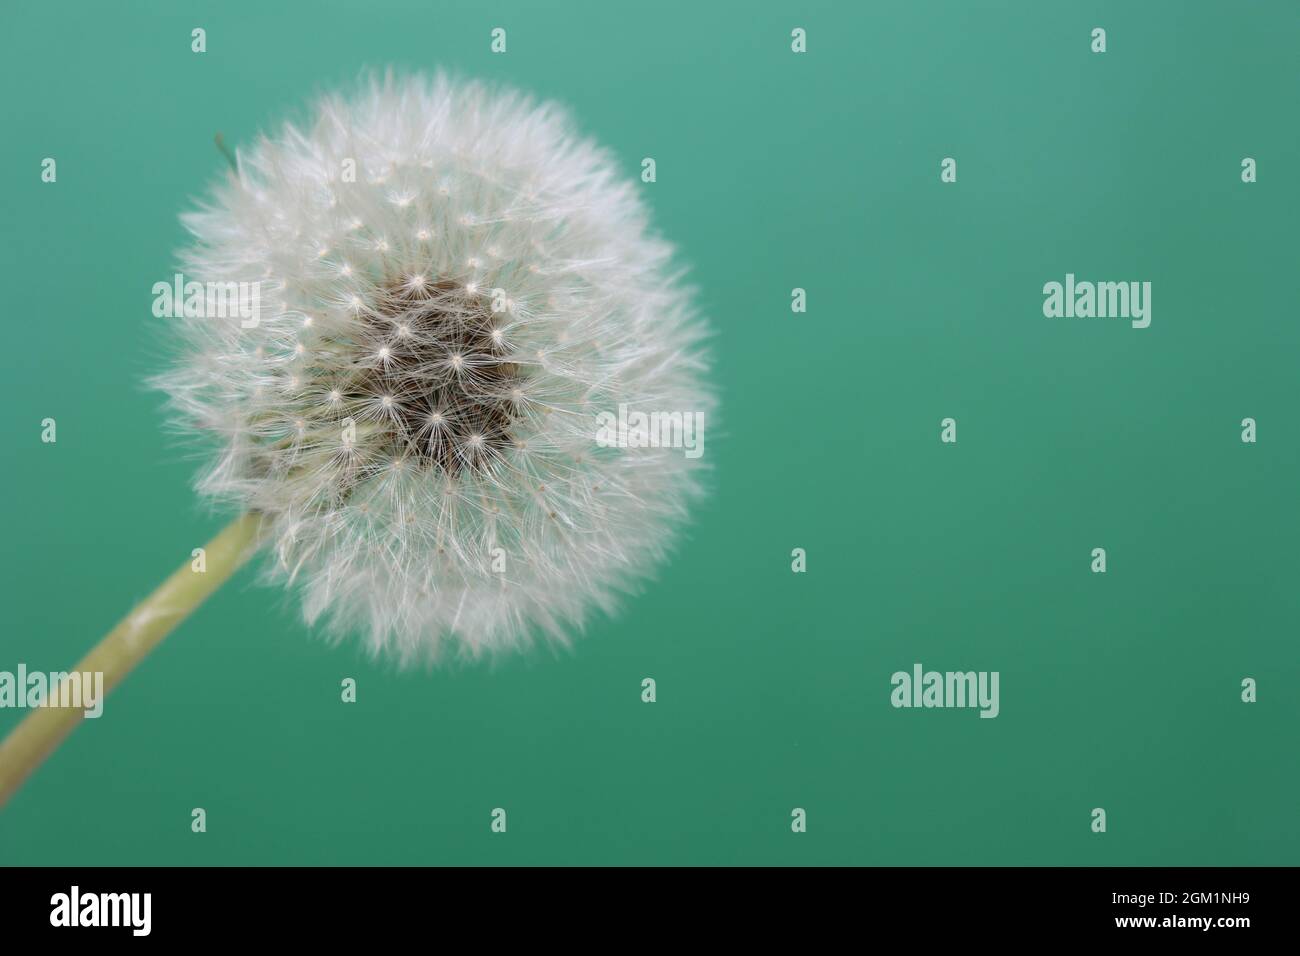 Dandelion Flower Seed Head on Colorful Background Stock Photo